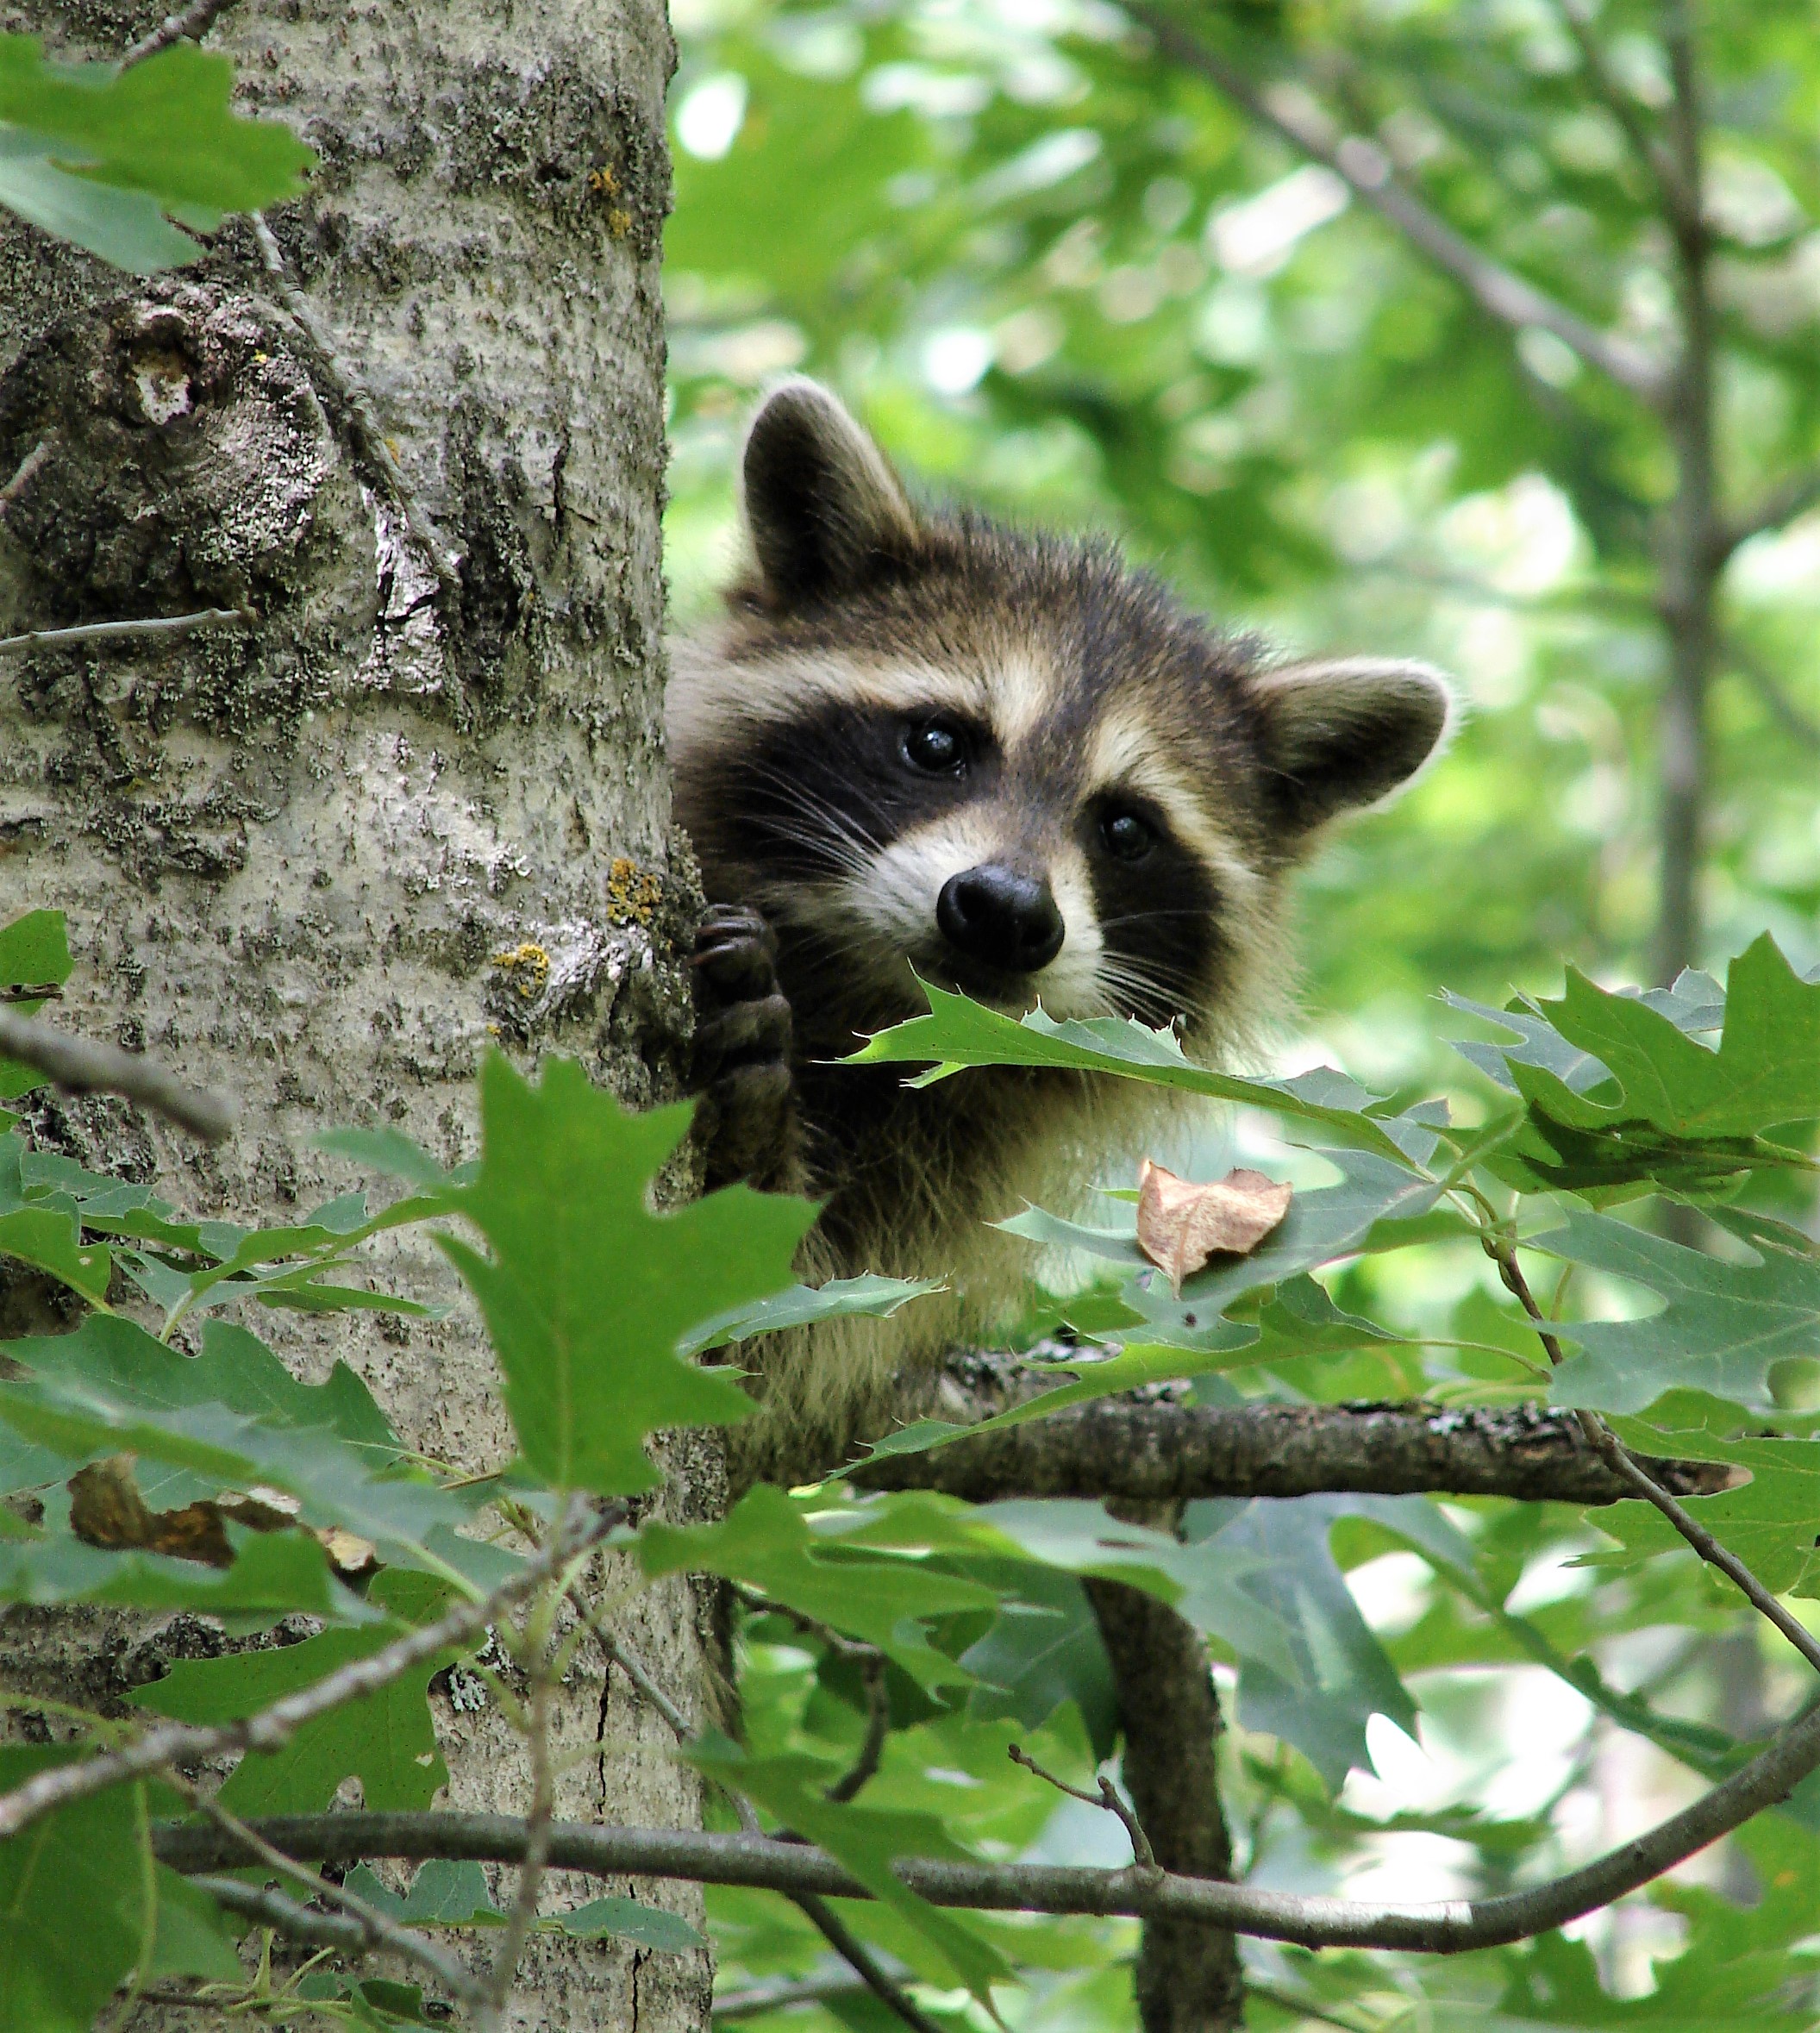 A young raccoon.